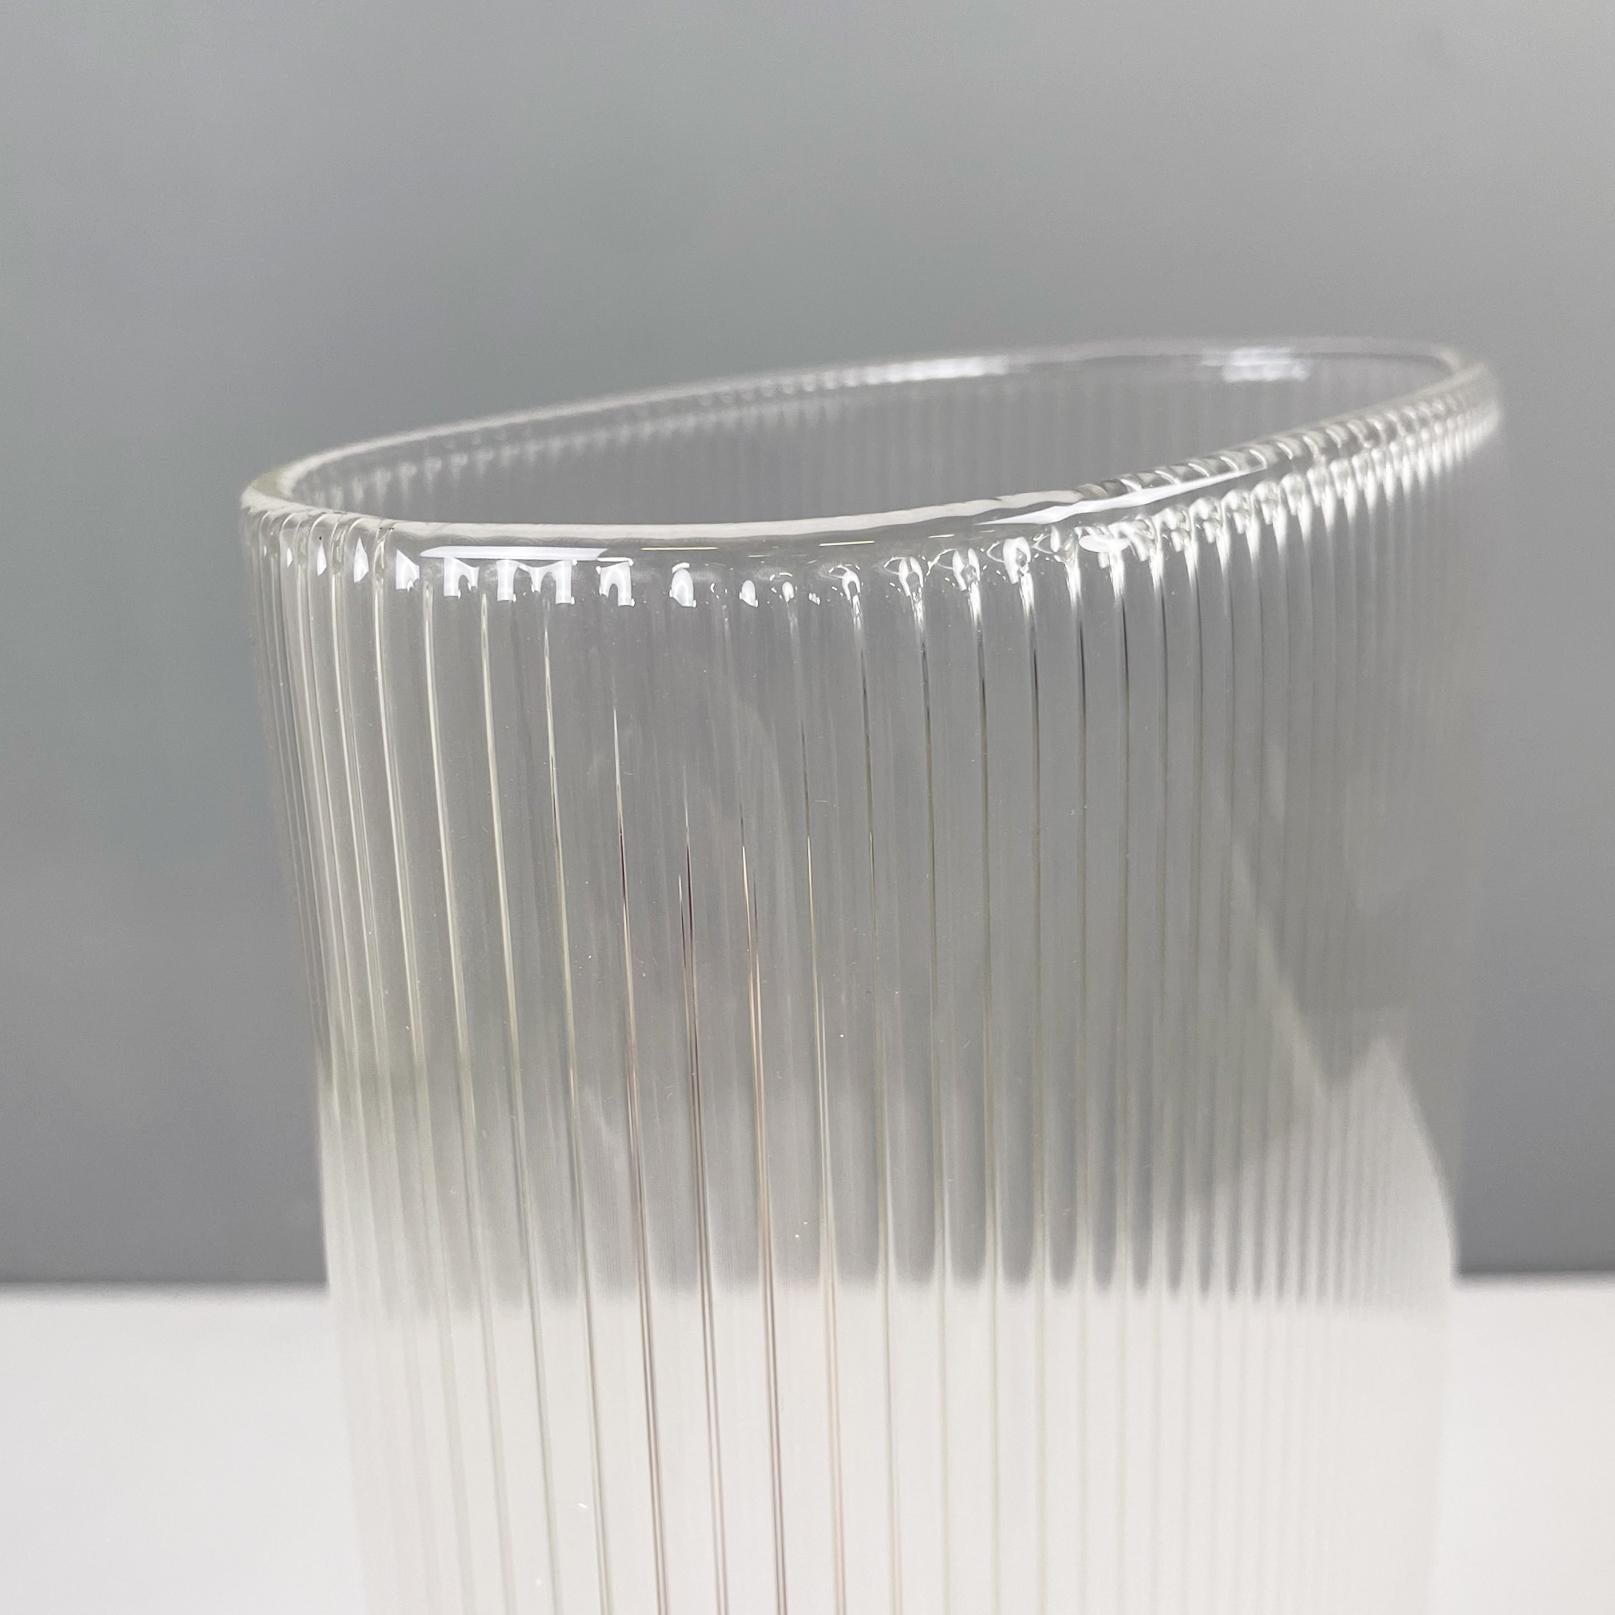 Italian modern Glass vase with oval shape by Roberto Faccioli, 1990s For Sale 1